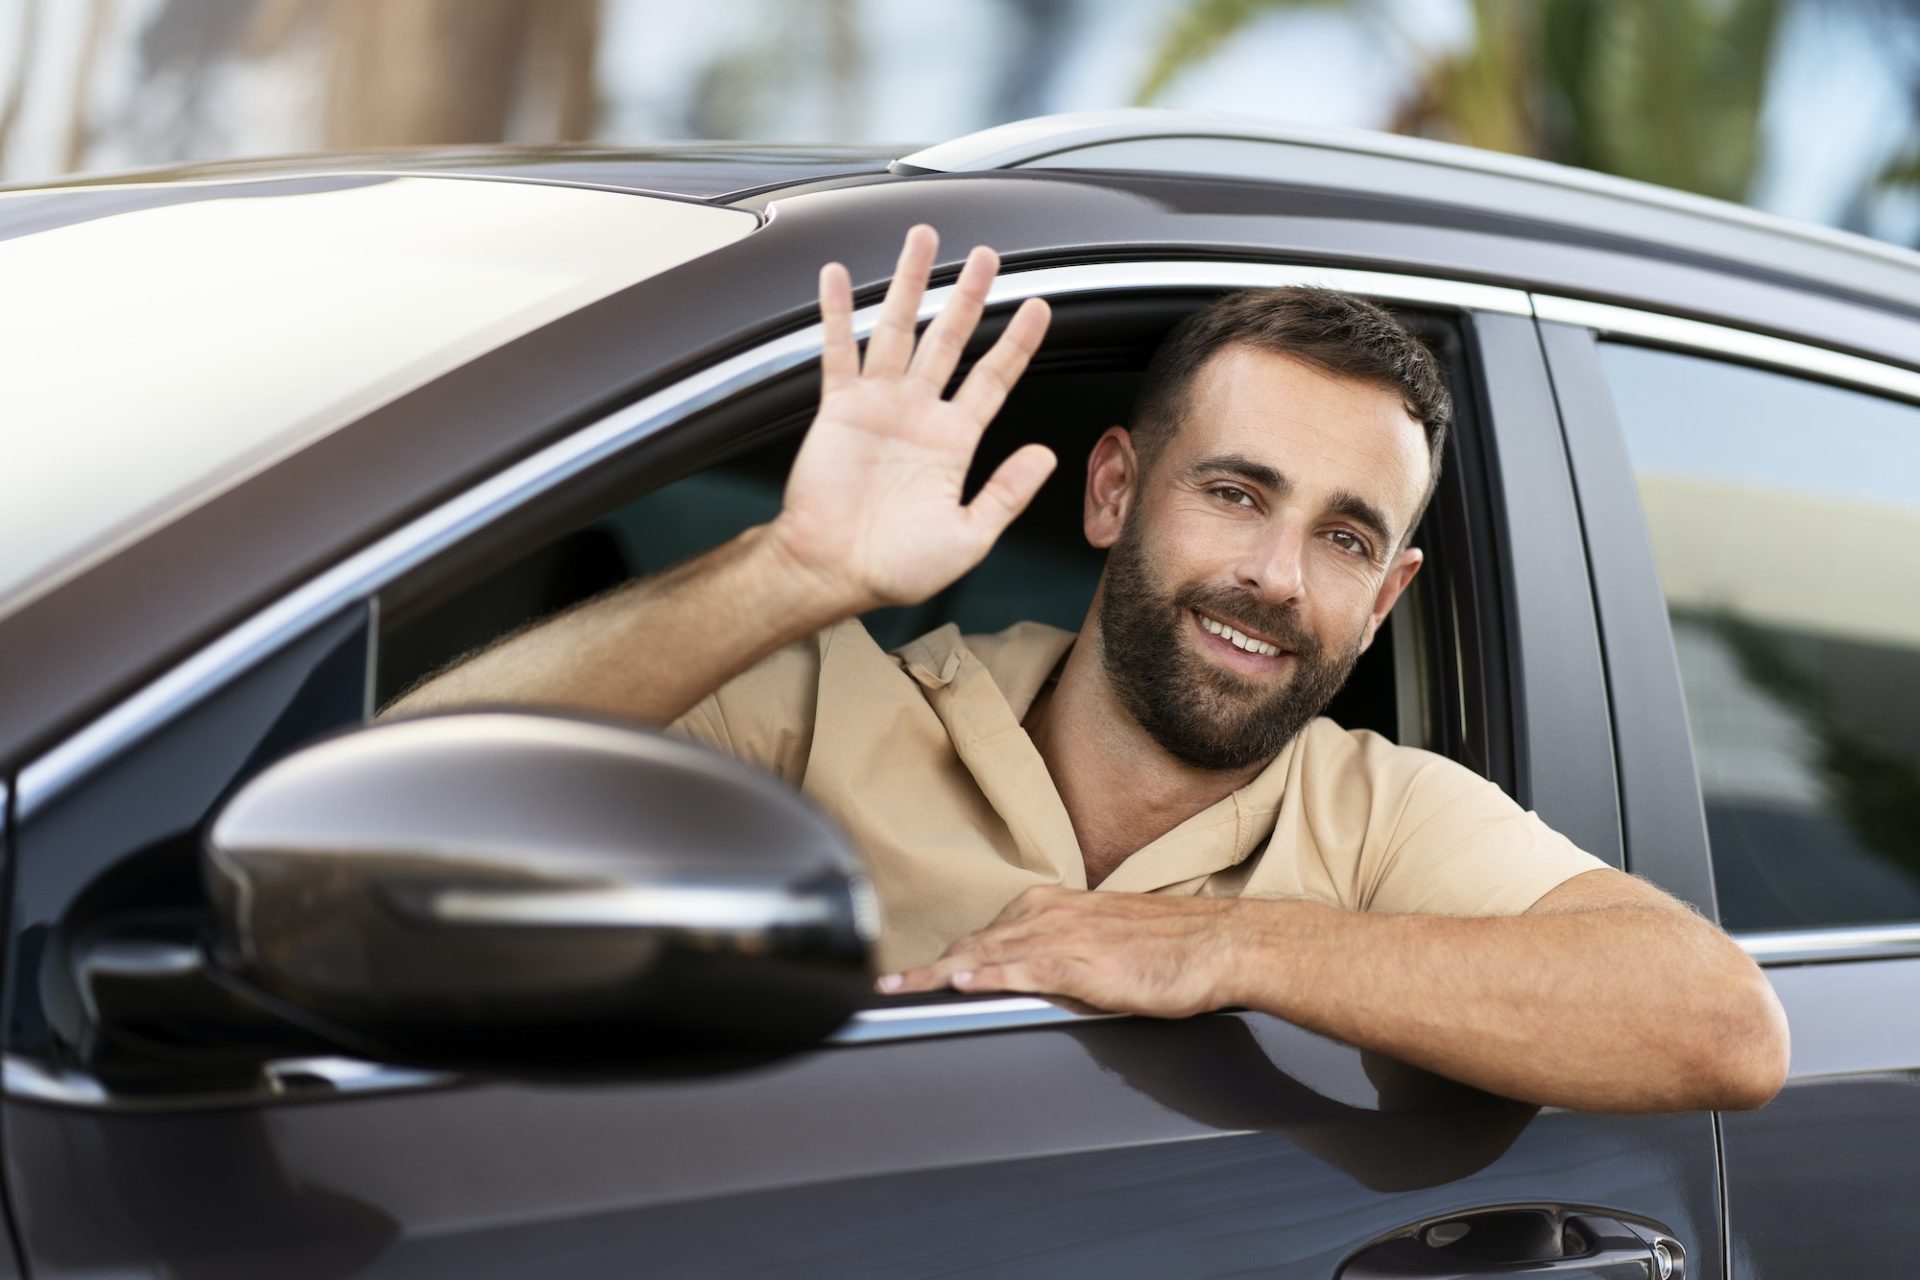 Taxi driver waving hand waiting for client sitting in car. Transportation concept